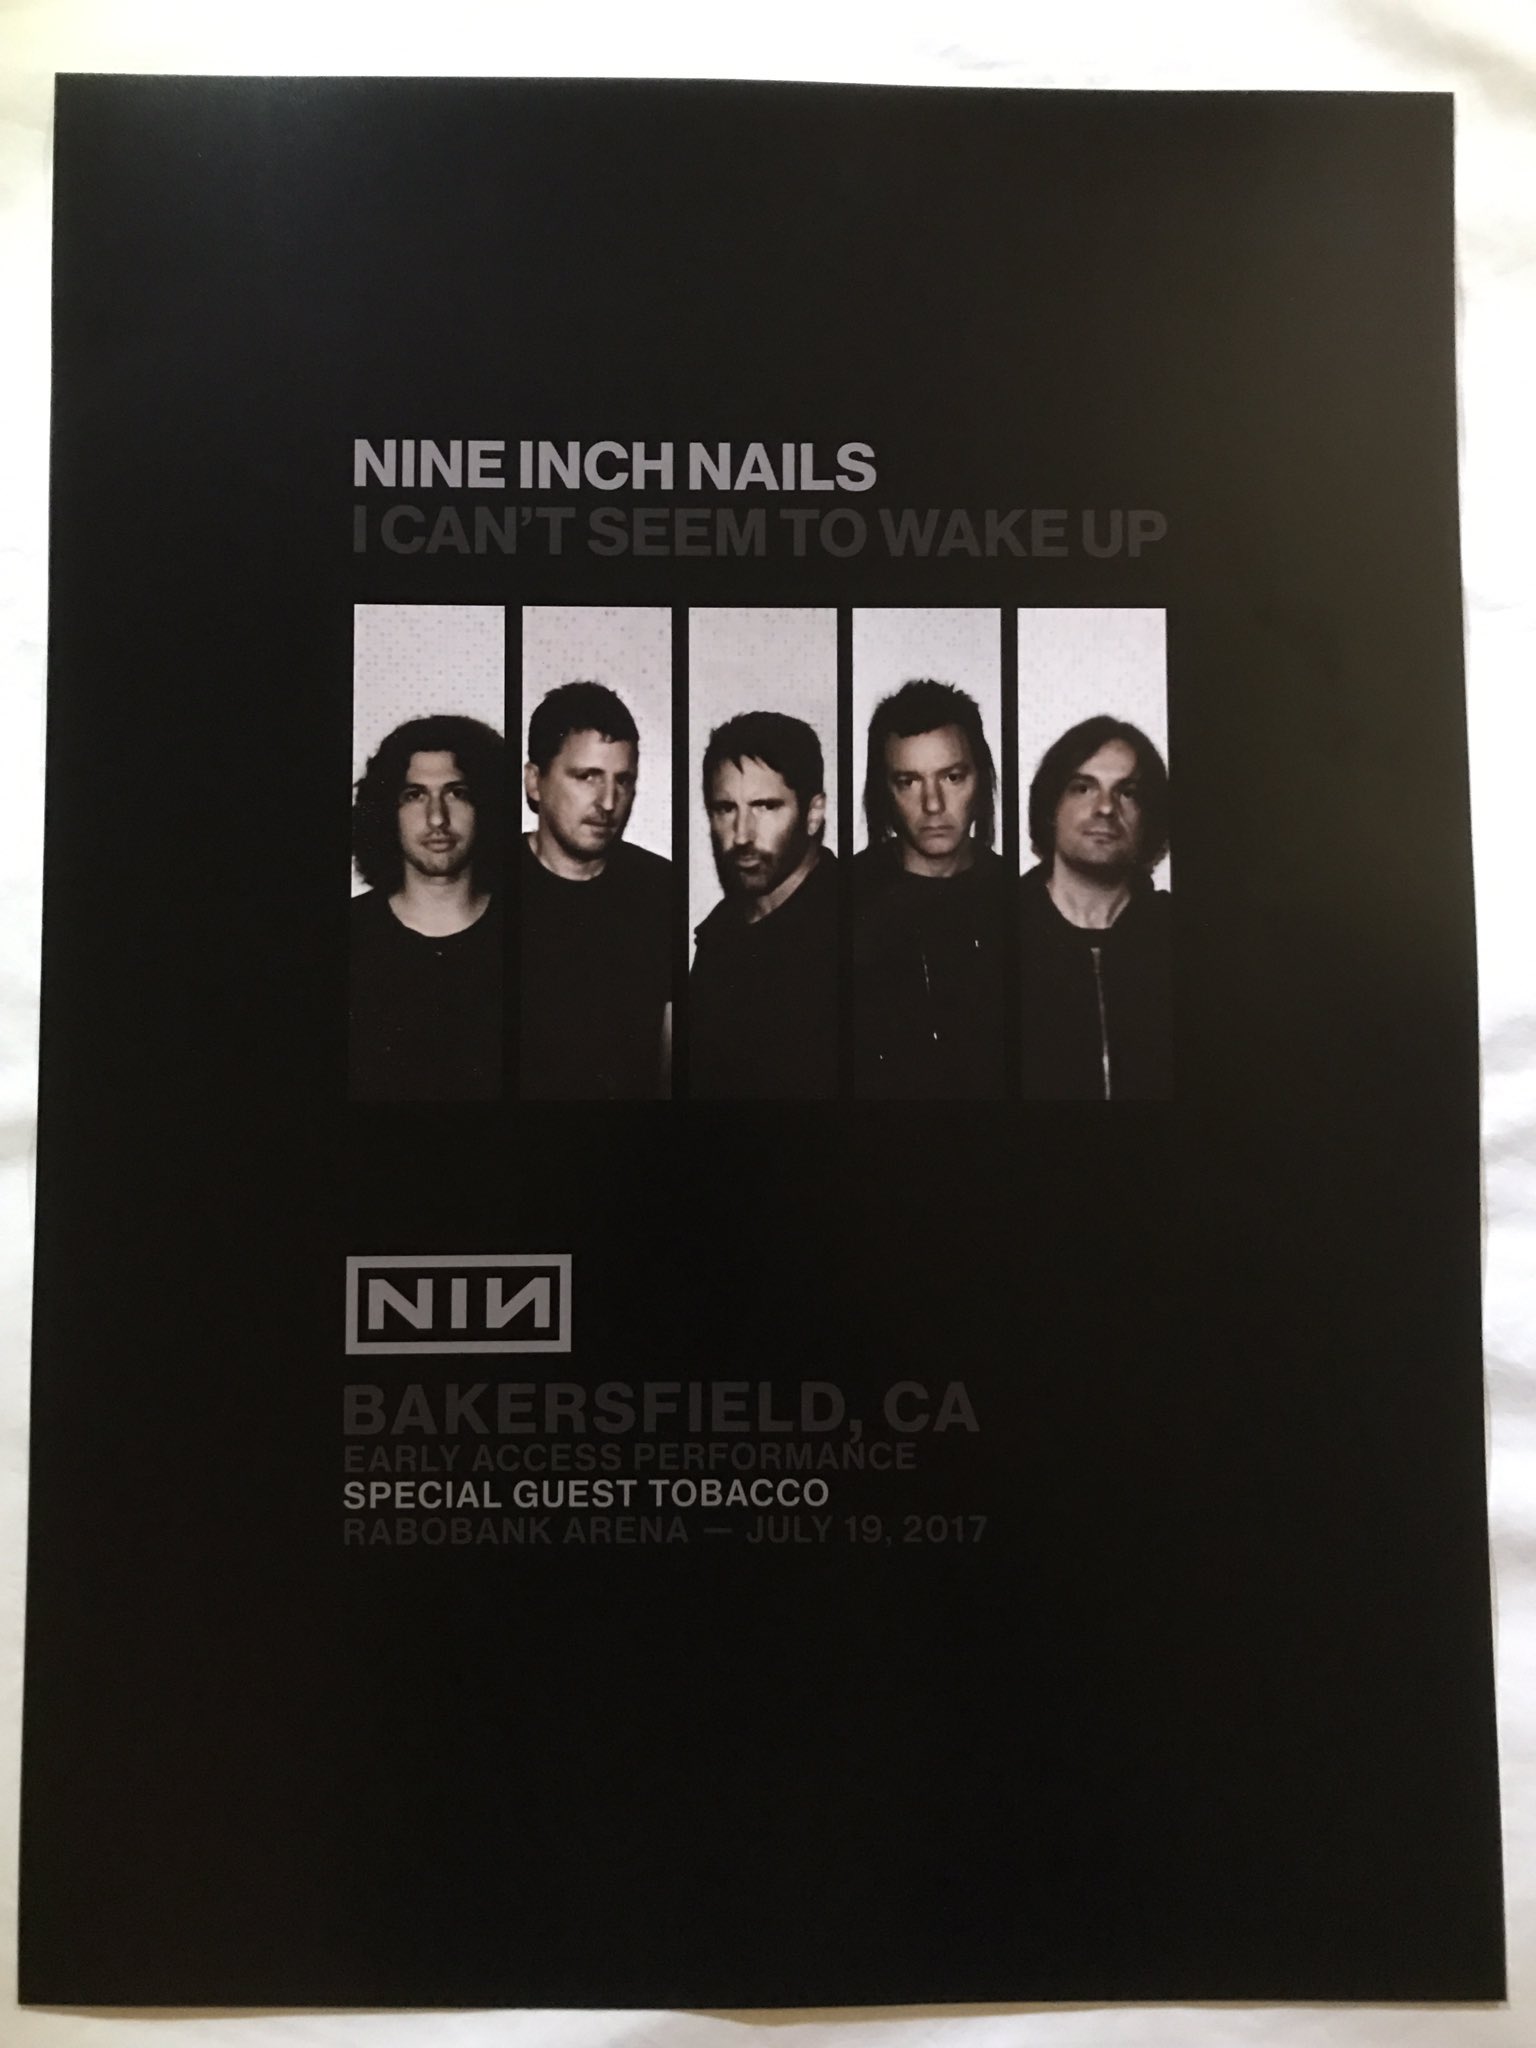 <a href='https://www.ebay.com/sch/i.html?_from=R40&_trksid=p2323012.m570.l1313&_nkw=Nine+Inch+Nails+Poster+Bakersfield&_sacat=0&mkcid=1&mkrid=711-53200-19255-0&siteid=0&campid=5336302525&customid=poster&toolid=10001&mkevt=1'>Buy this Poster!</a>